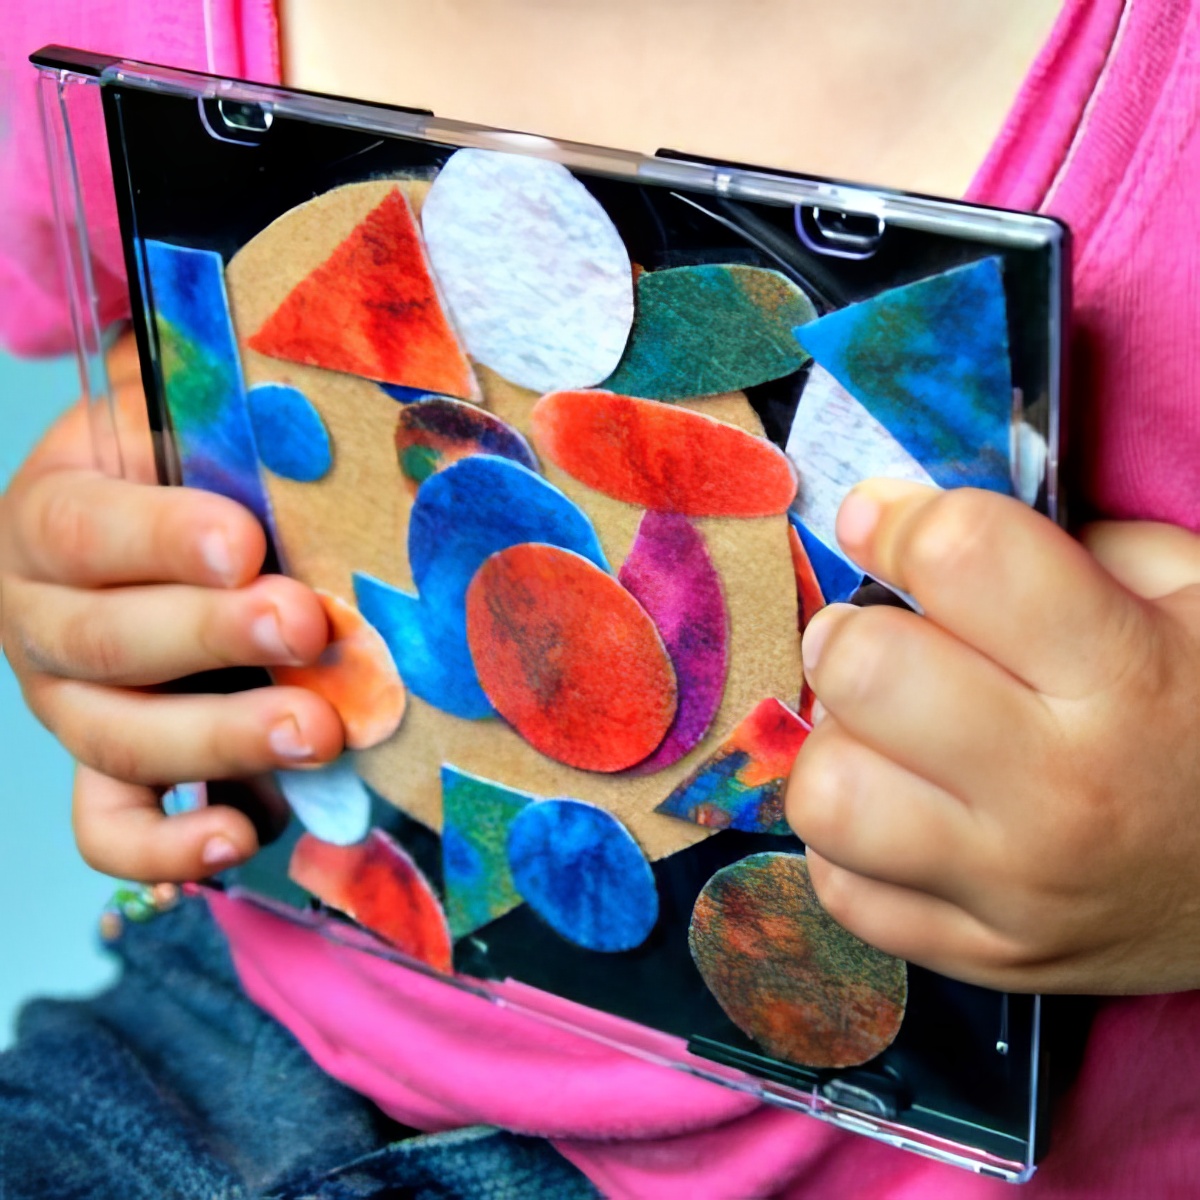 handcraft this Felt shapes board together with your kids!